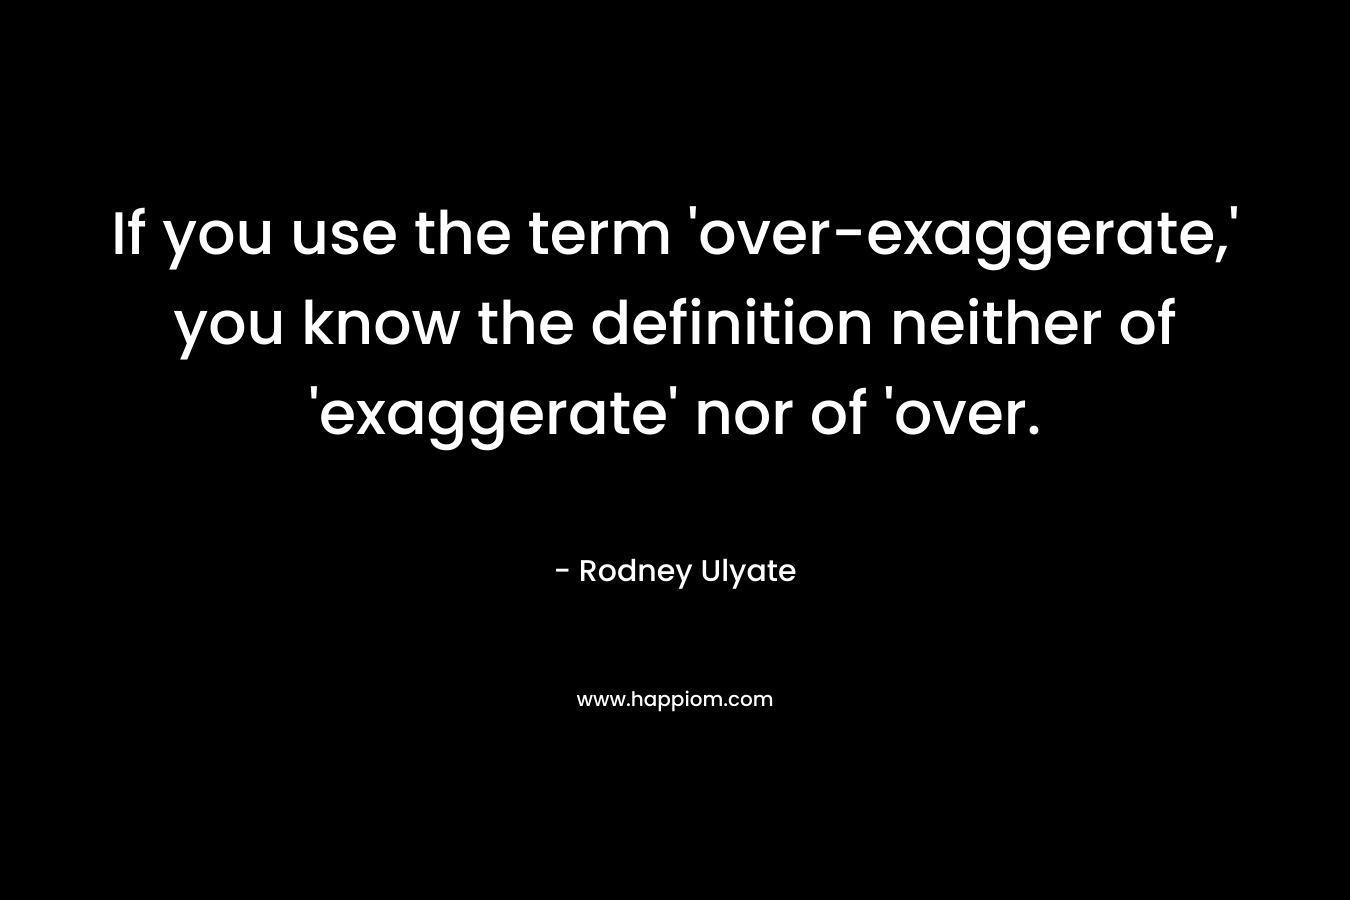 If you use the term 'over-exaggerate,' you know the definition neither of 'exaggerate' nor of 'over.